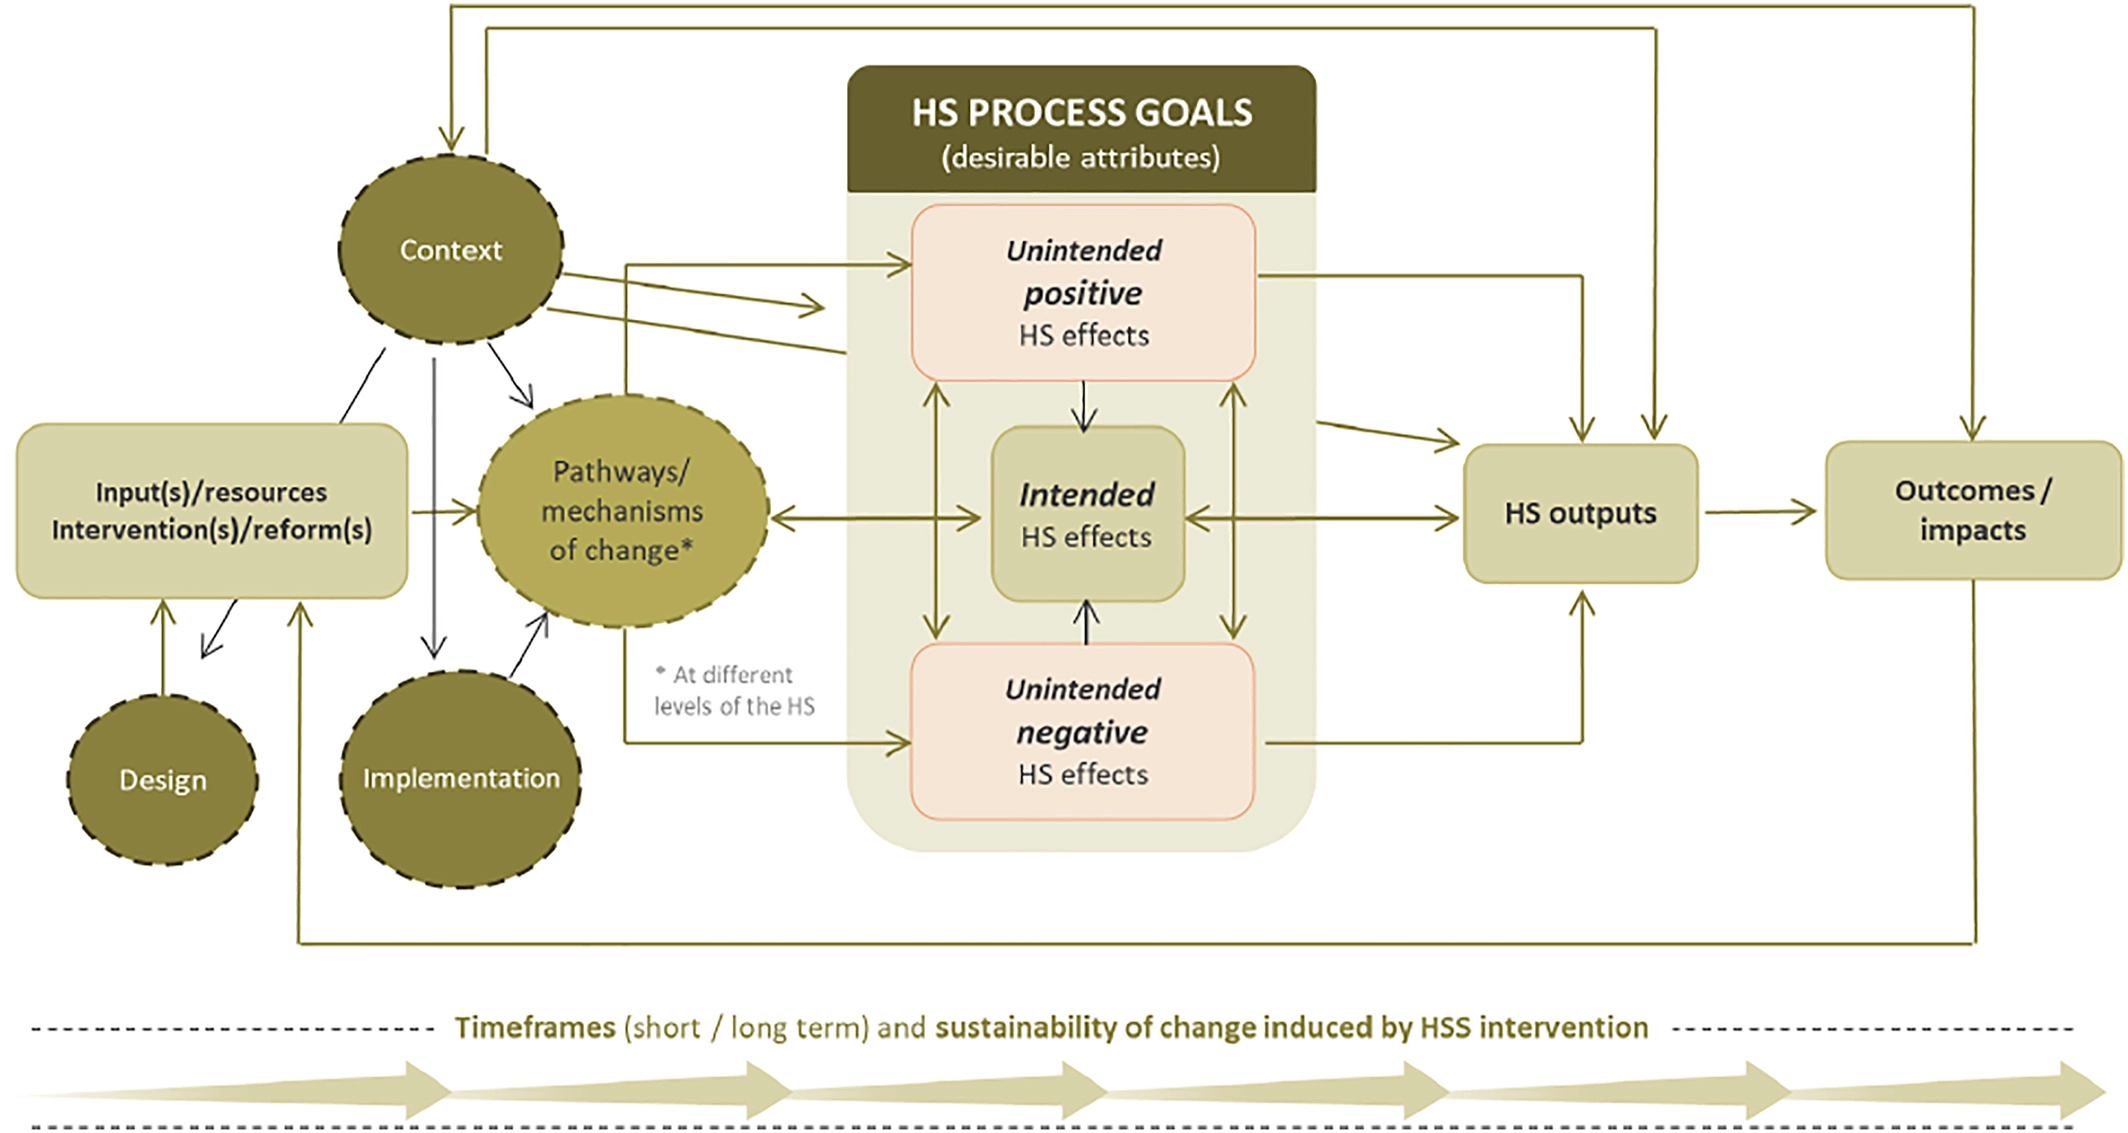 A complex model showing the broad factors at play i health system strengthening over time